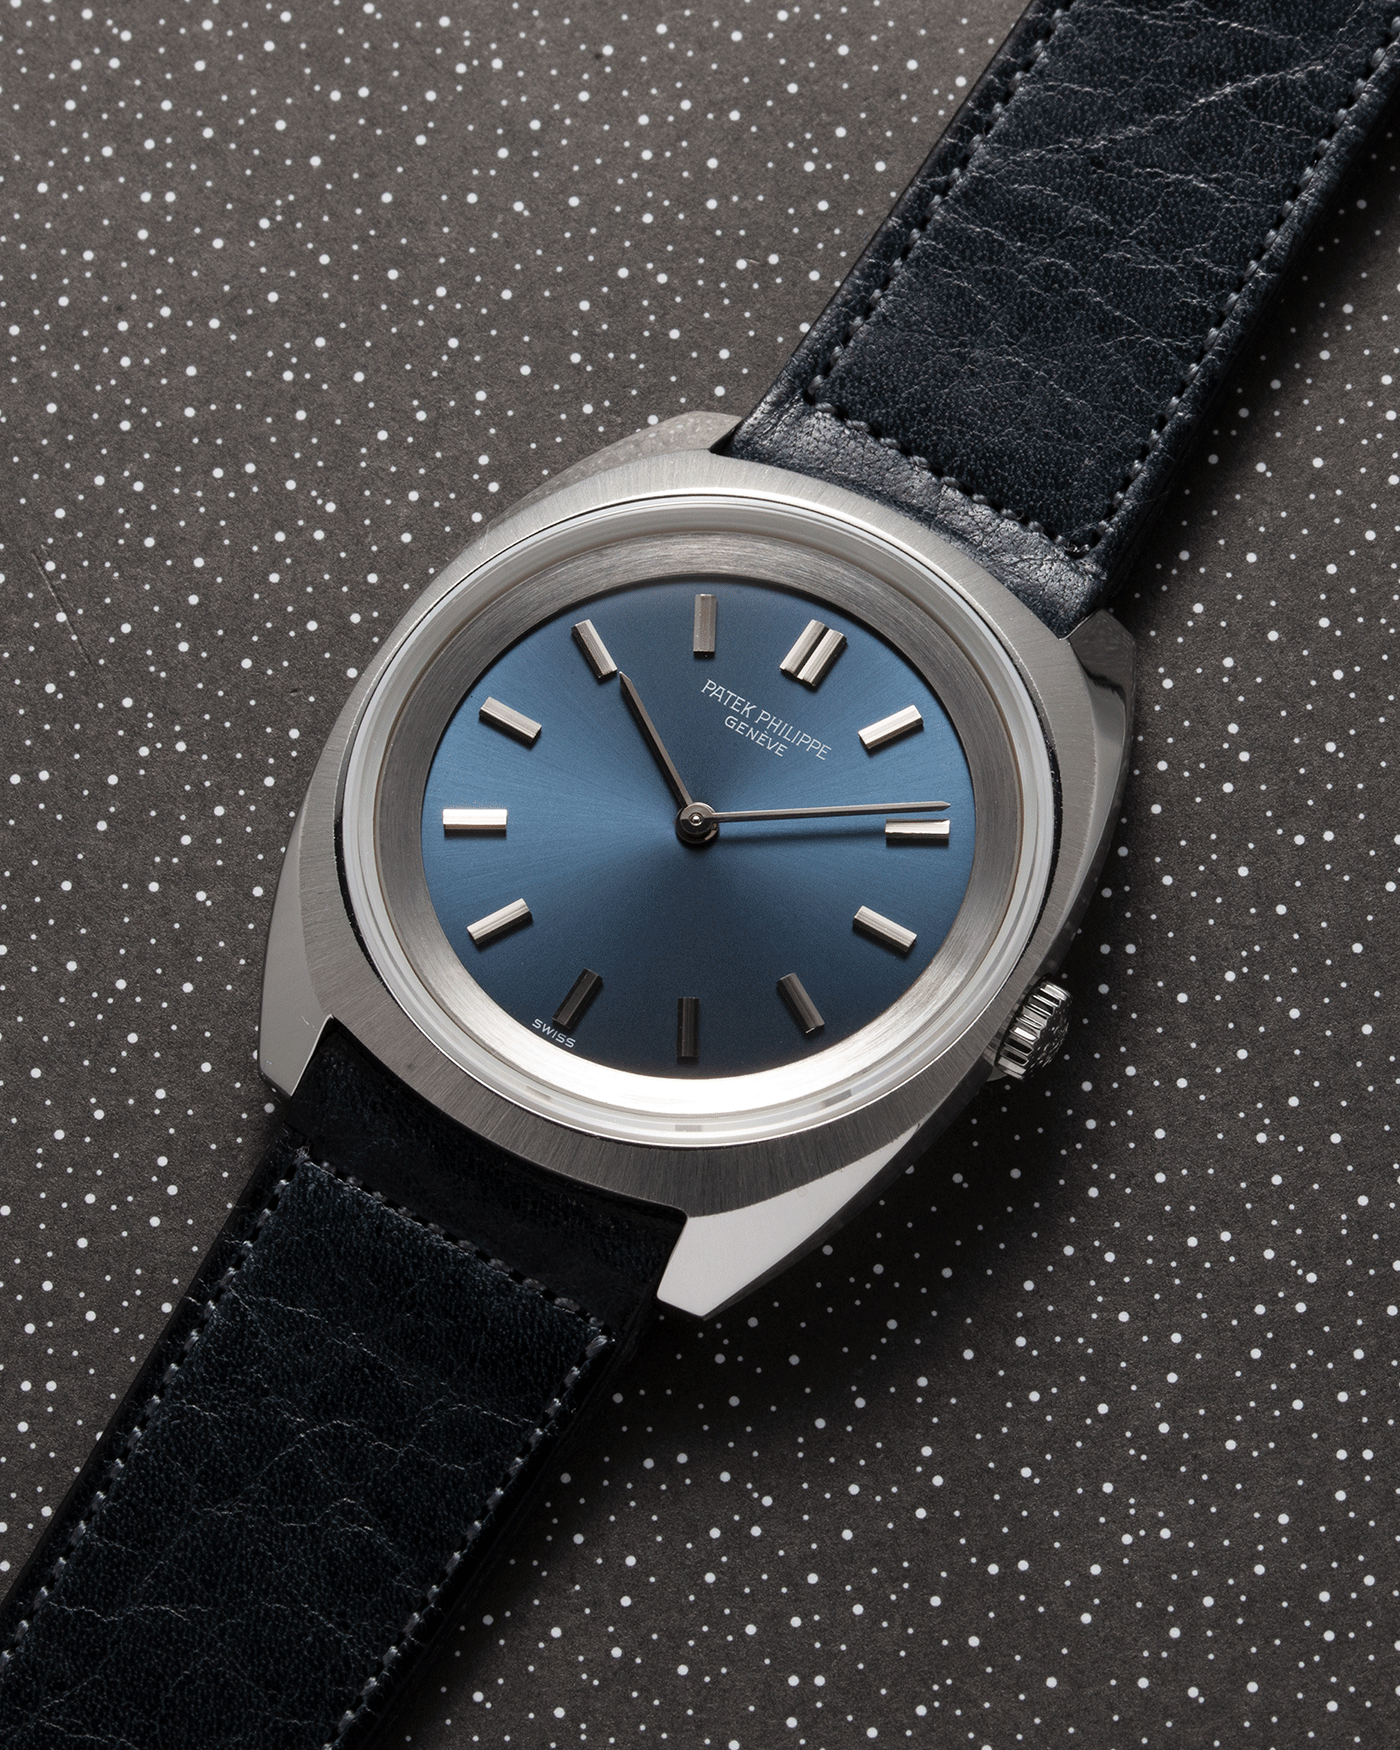 Brand: Patek Philippe Year: 1970s Reference: 3579 Material: Stainless Steel Movement: Cal 23-300 Case Diameter: 33mm Strap: Accurate Form Navy Blue Japanese Calf